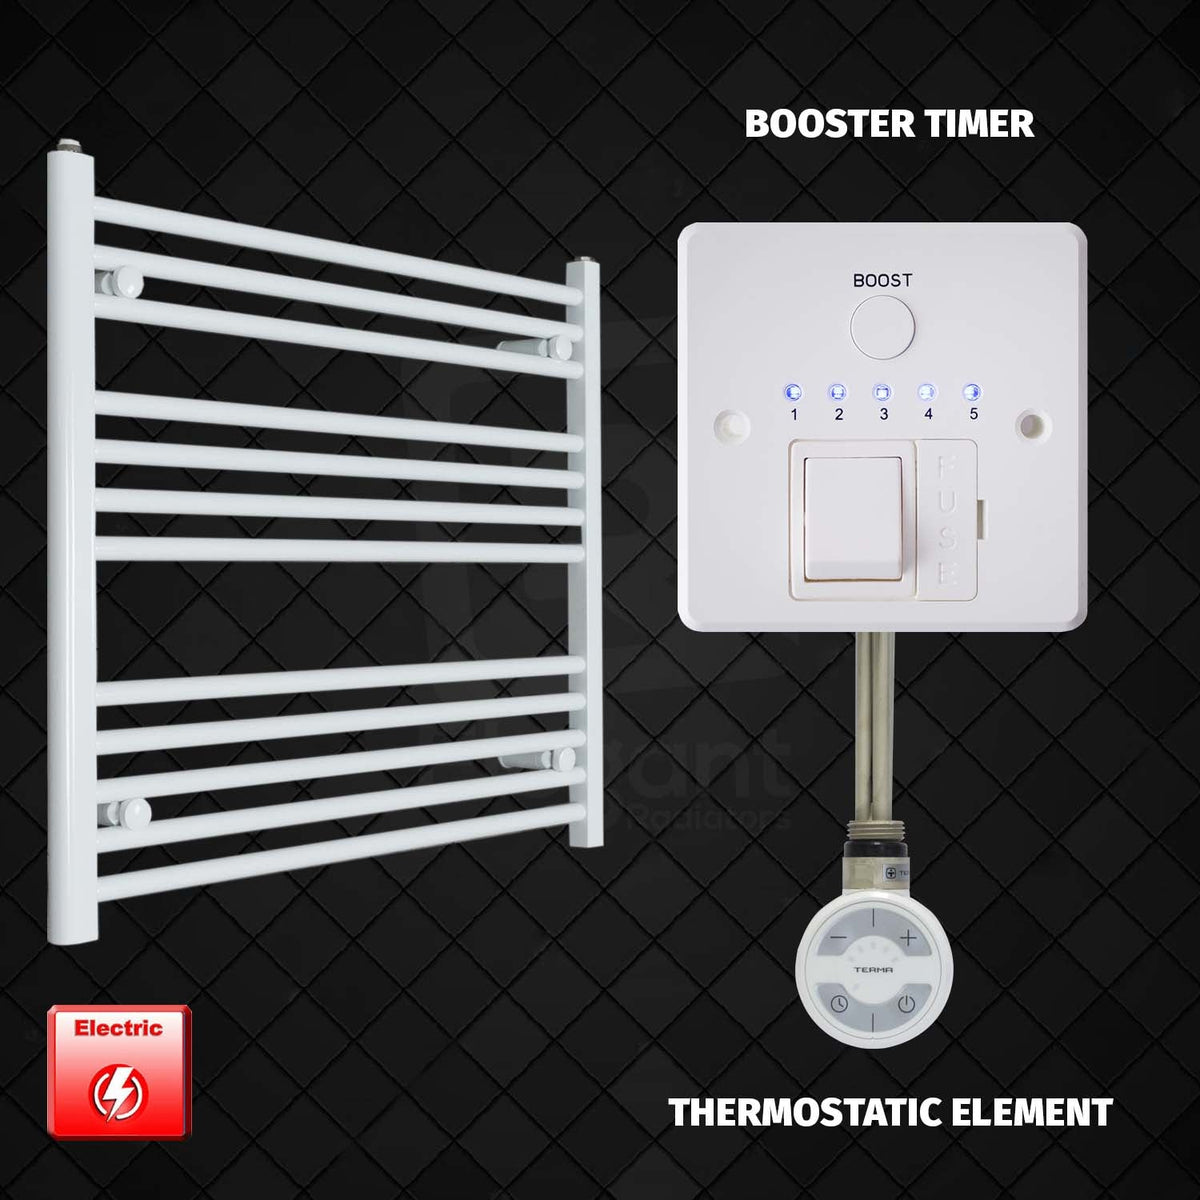 700 mm High x 900 mm Wide Pre-Filled Electric Towel Rail White HTR MOA Thermostatic element Booster timer